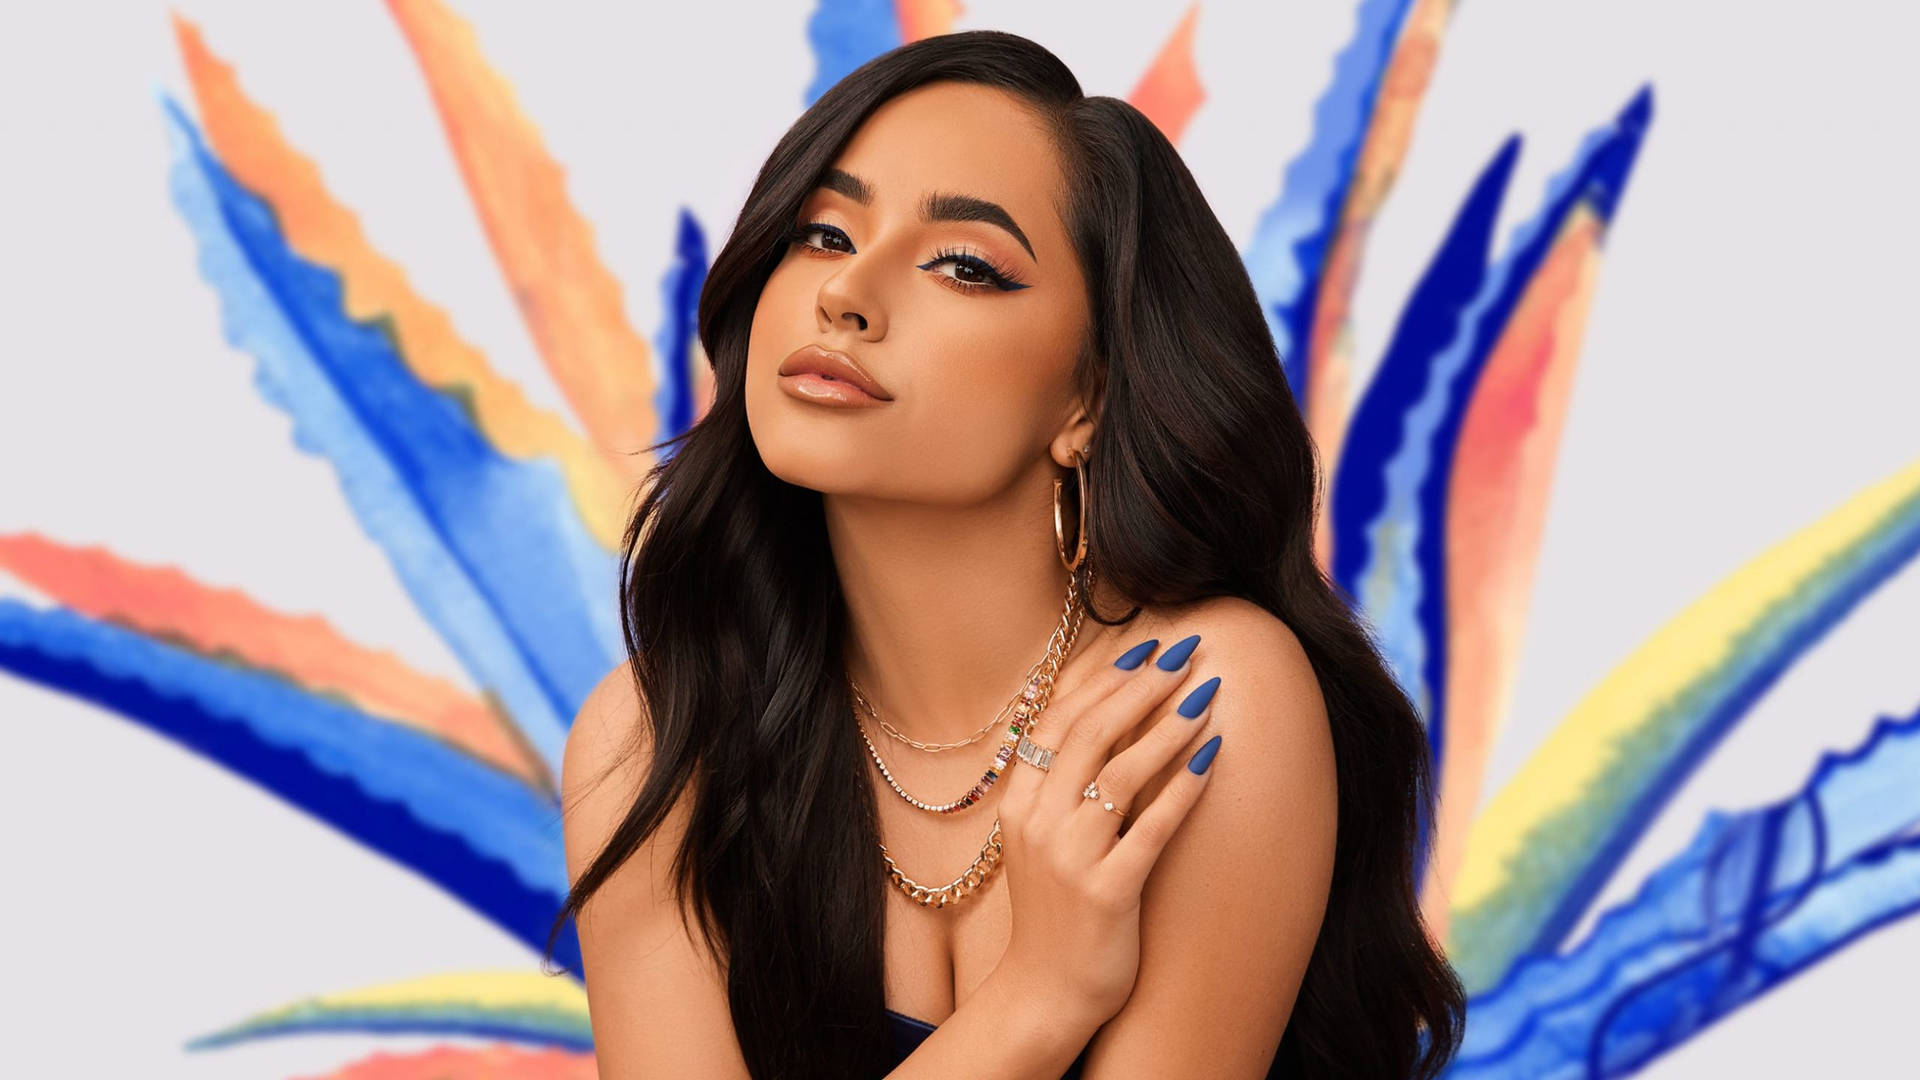 Free Becky G Wallpaper Downloads, [100+] Becky G Wallpapers for FREE |  